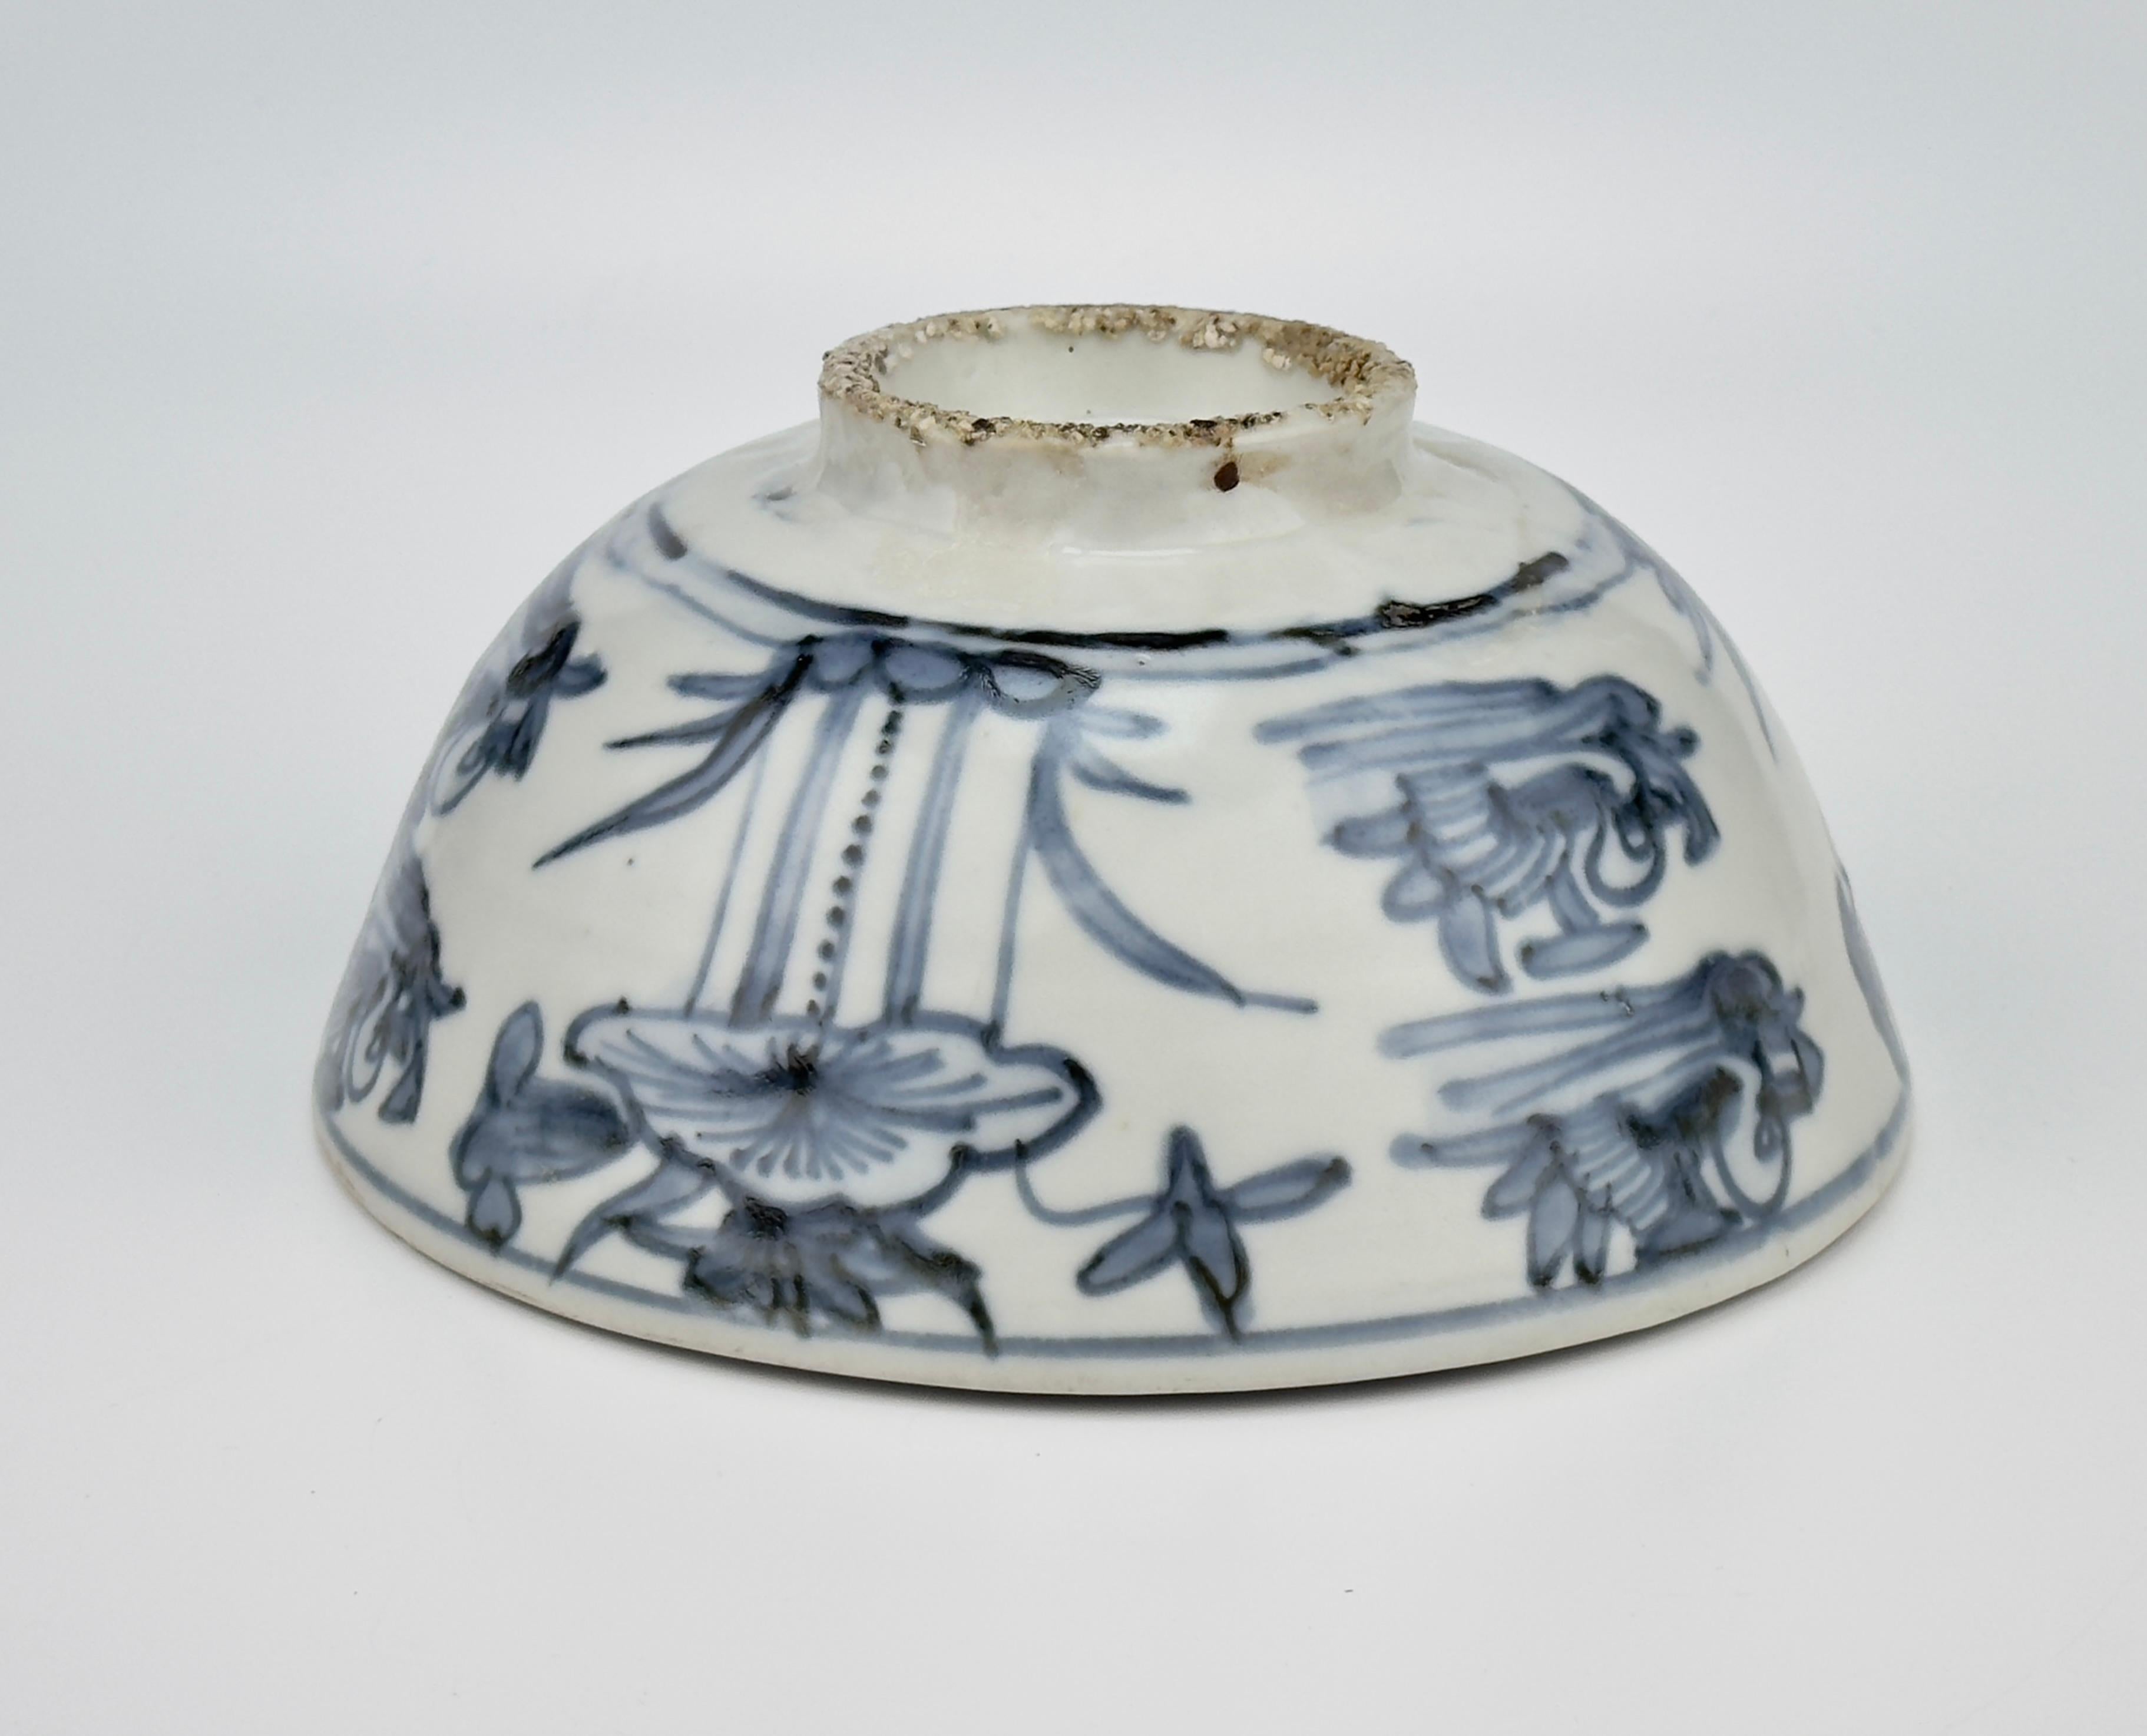 Ceramic Bowl with mandarin duck and lotus pattern design, Late Ming Era(16-17th century) For Sale